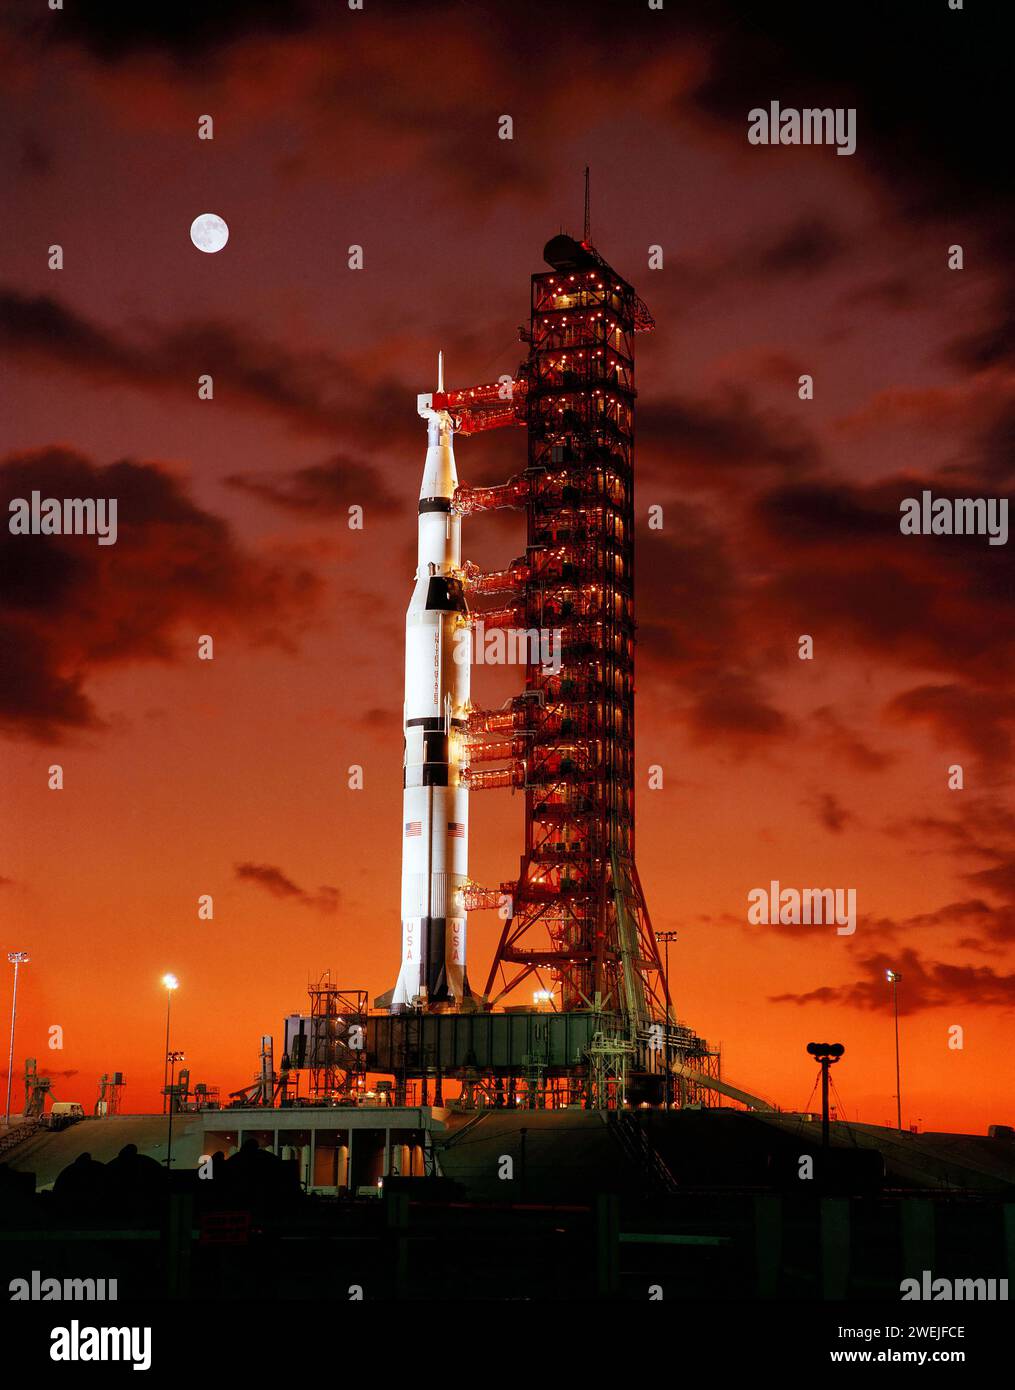 Early morning view of Apollo 4 (Spacecraft 017/Saturn 501) unmanned, earth-orbital space mission ready for launch, with full moon, Pad A, Launch Complex 39, Kennedy Space Center, Merritt Island, Florida, USA, NASA, November 9, 1967 Stock Photo